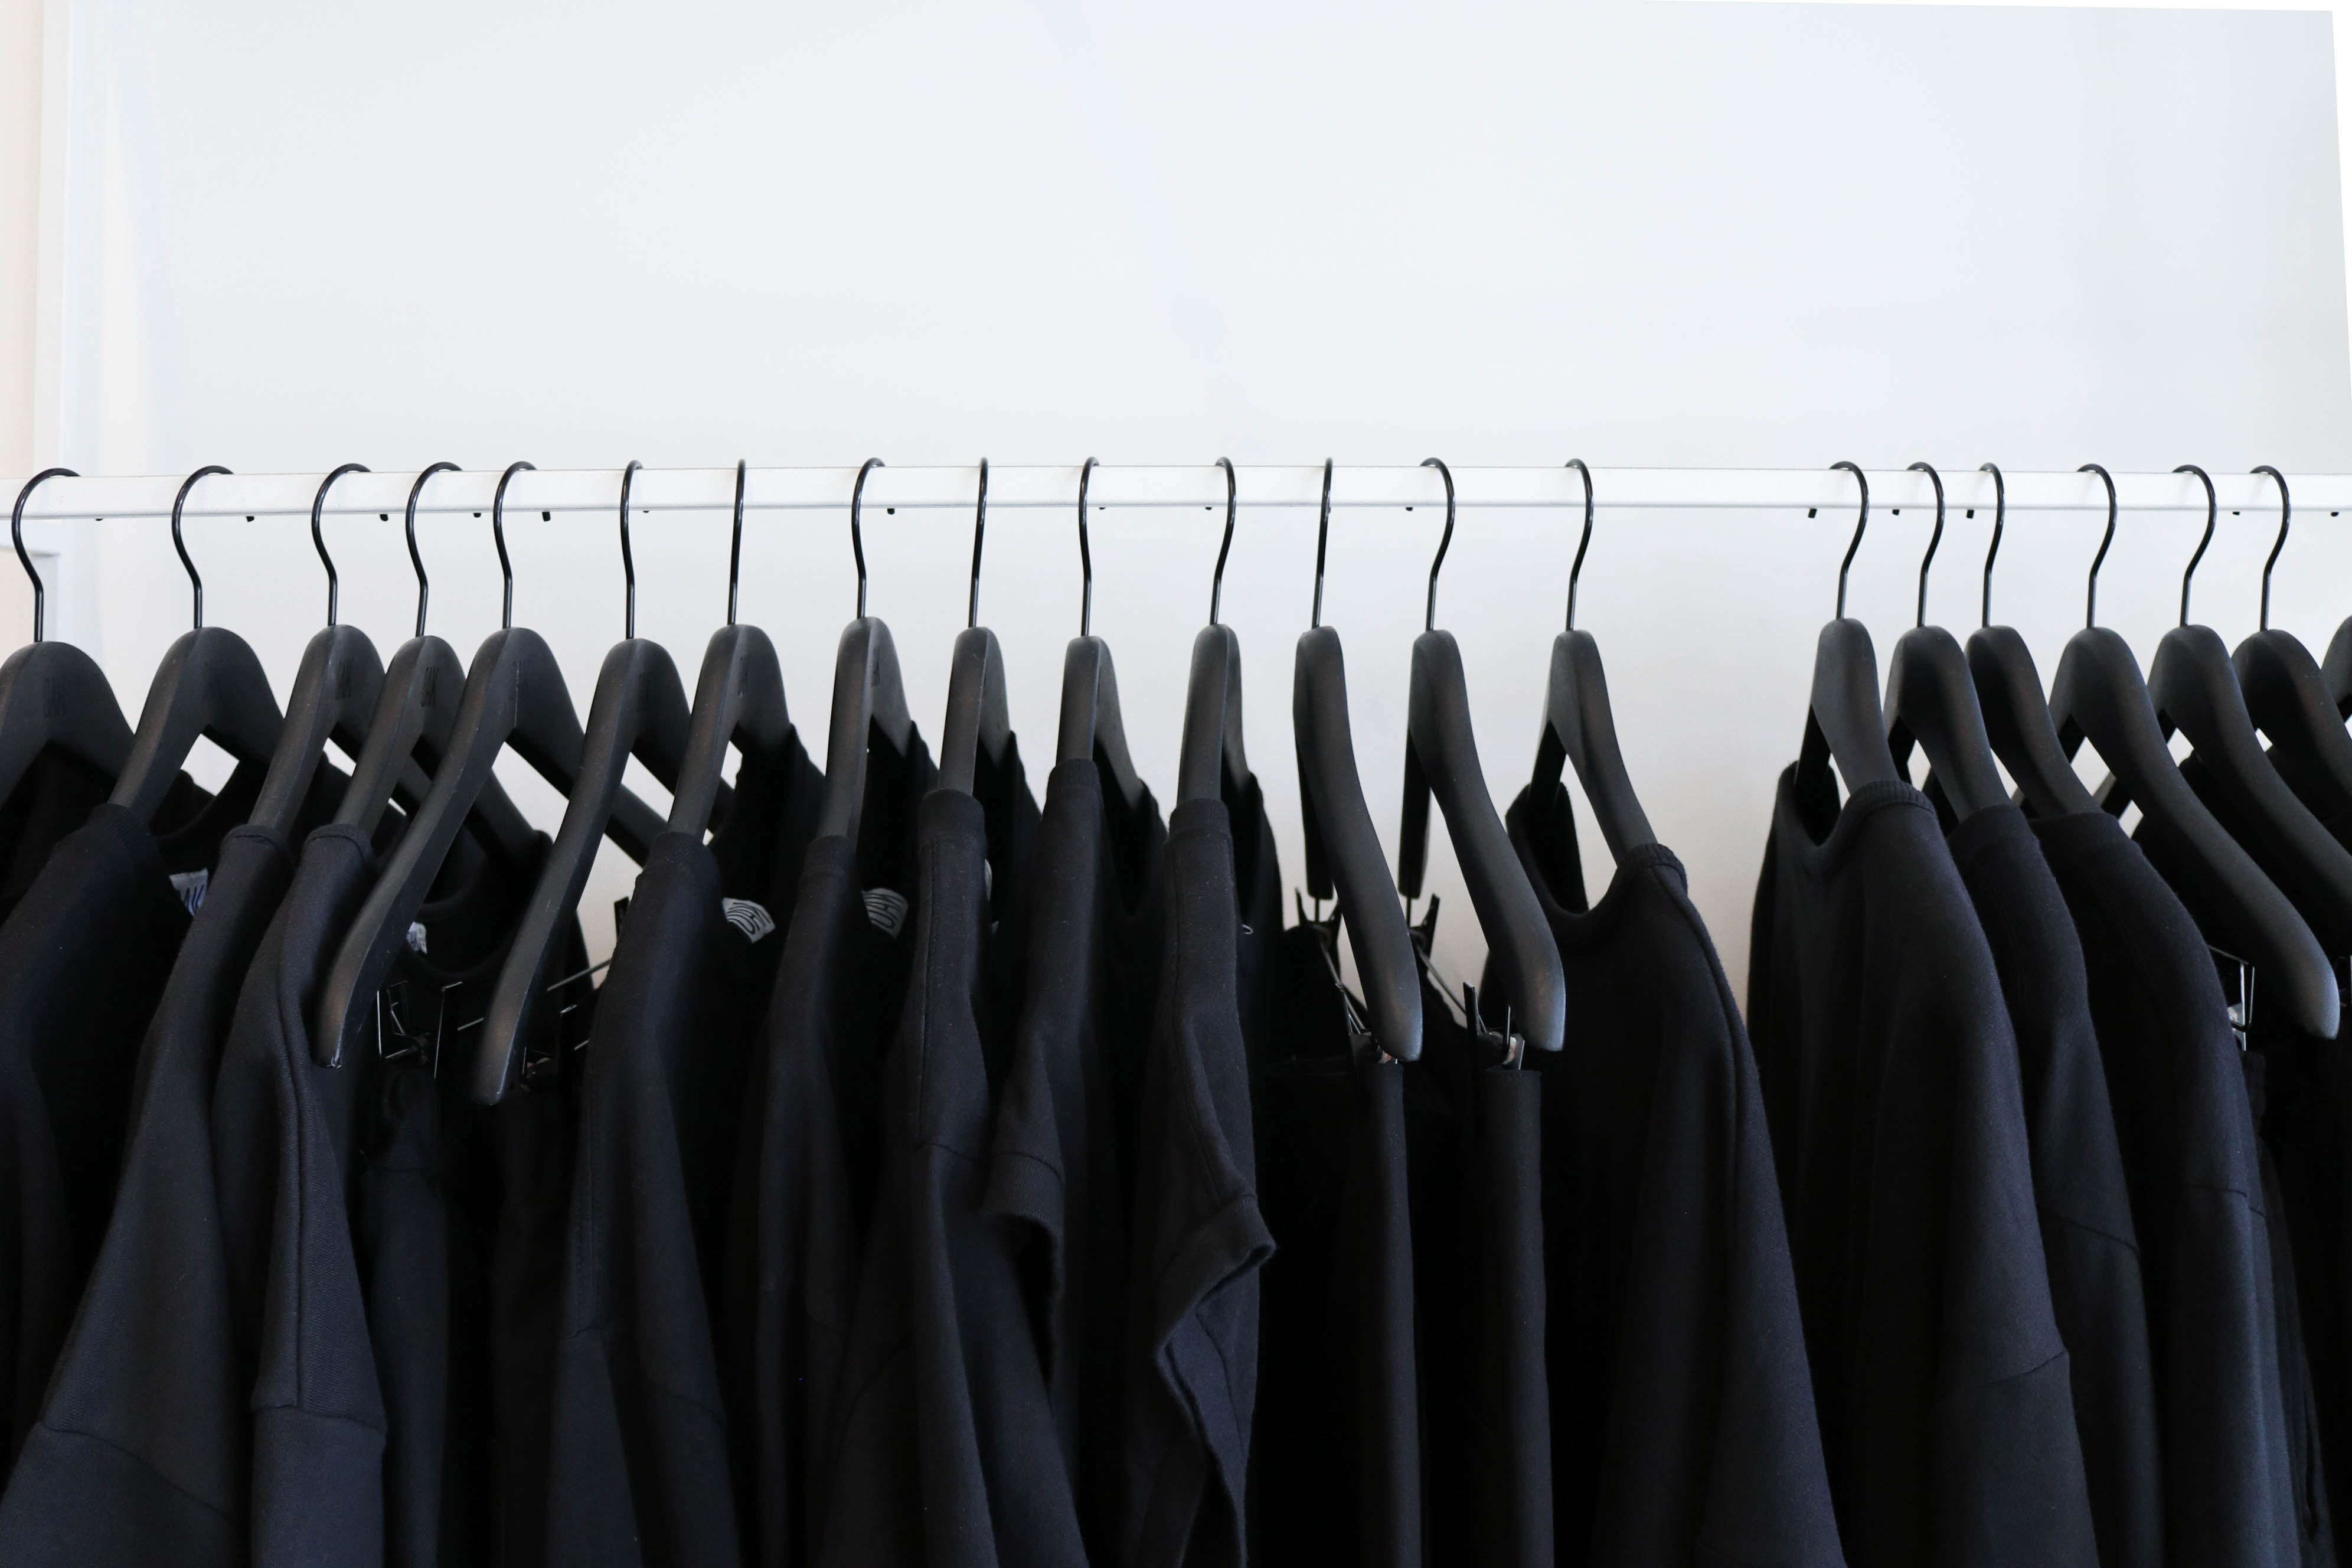 Black t-shirts on hangers hanging from a clothing rack.